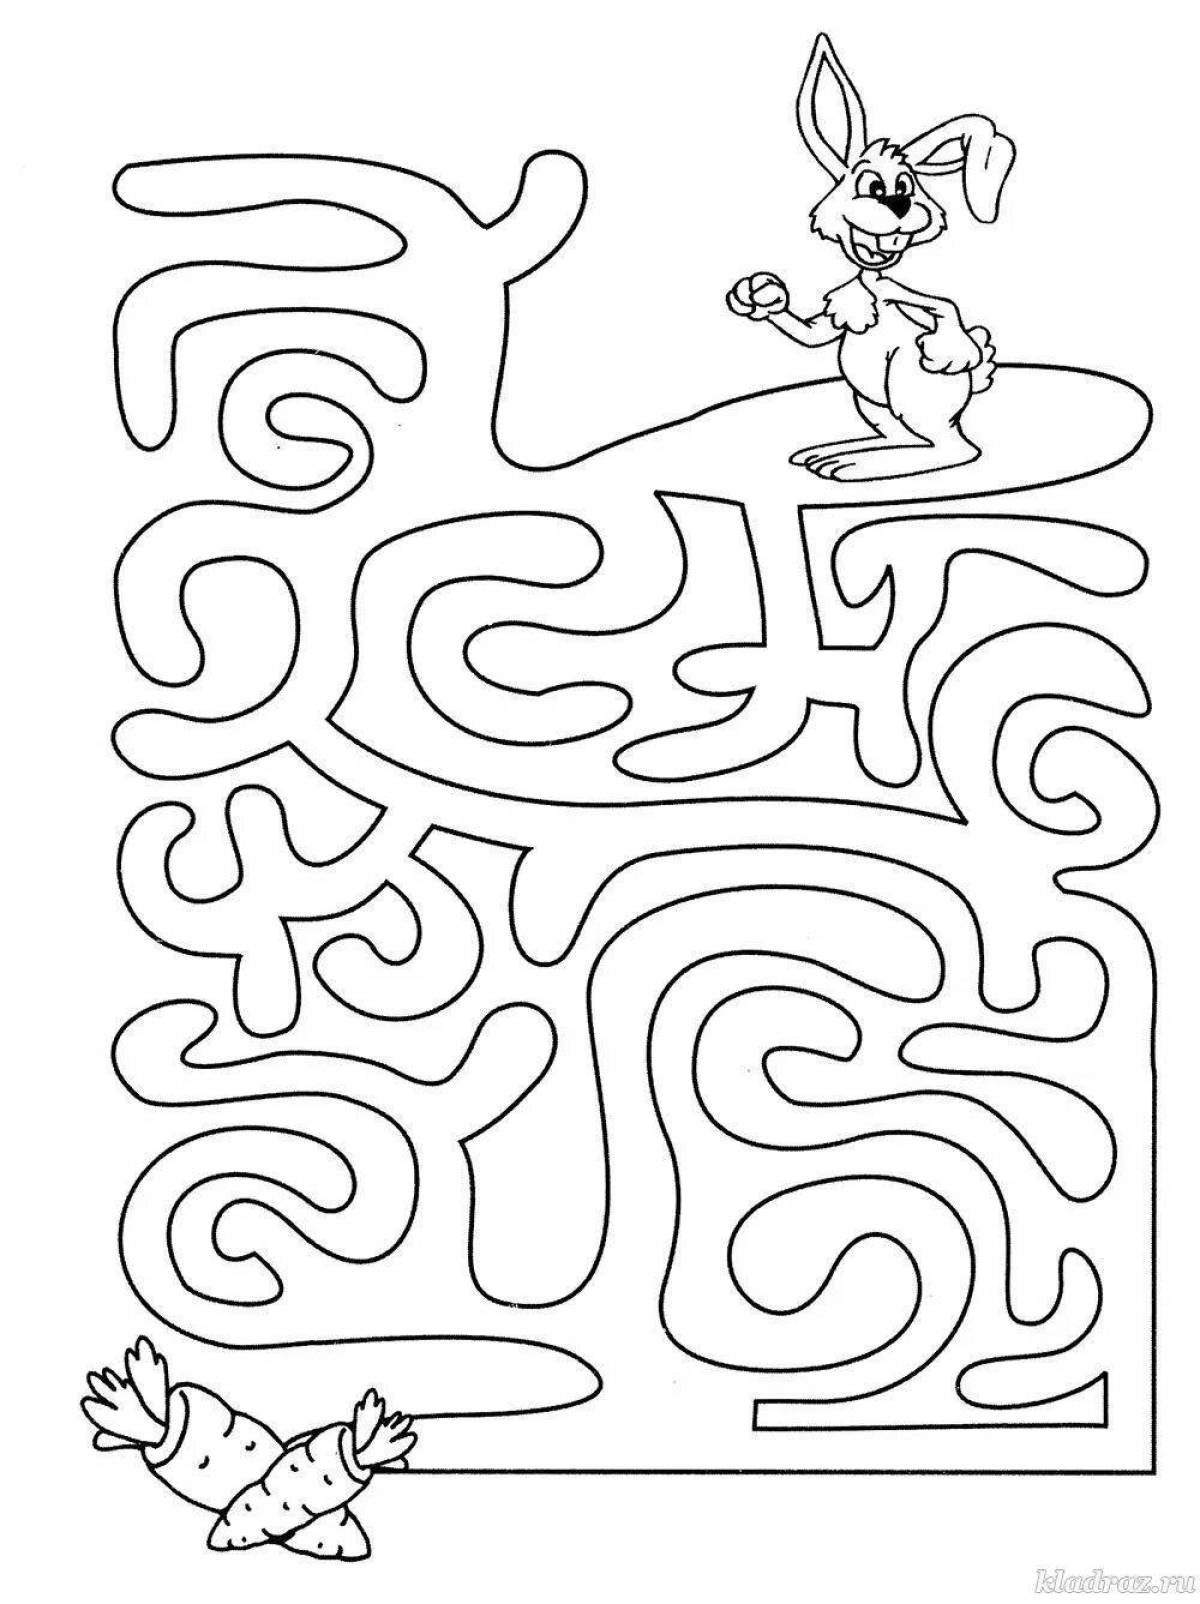 Inspiring maze coloring book for 4 year olds